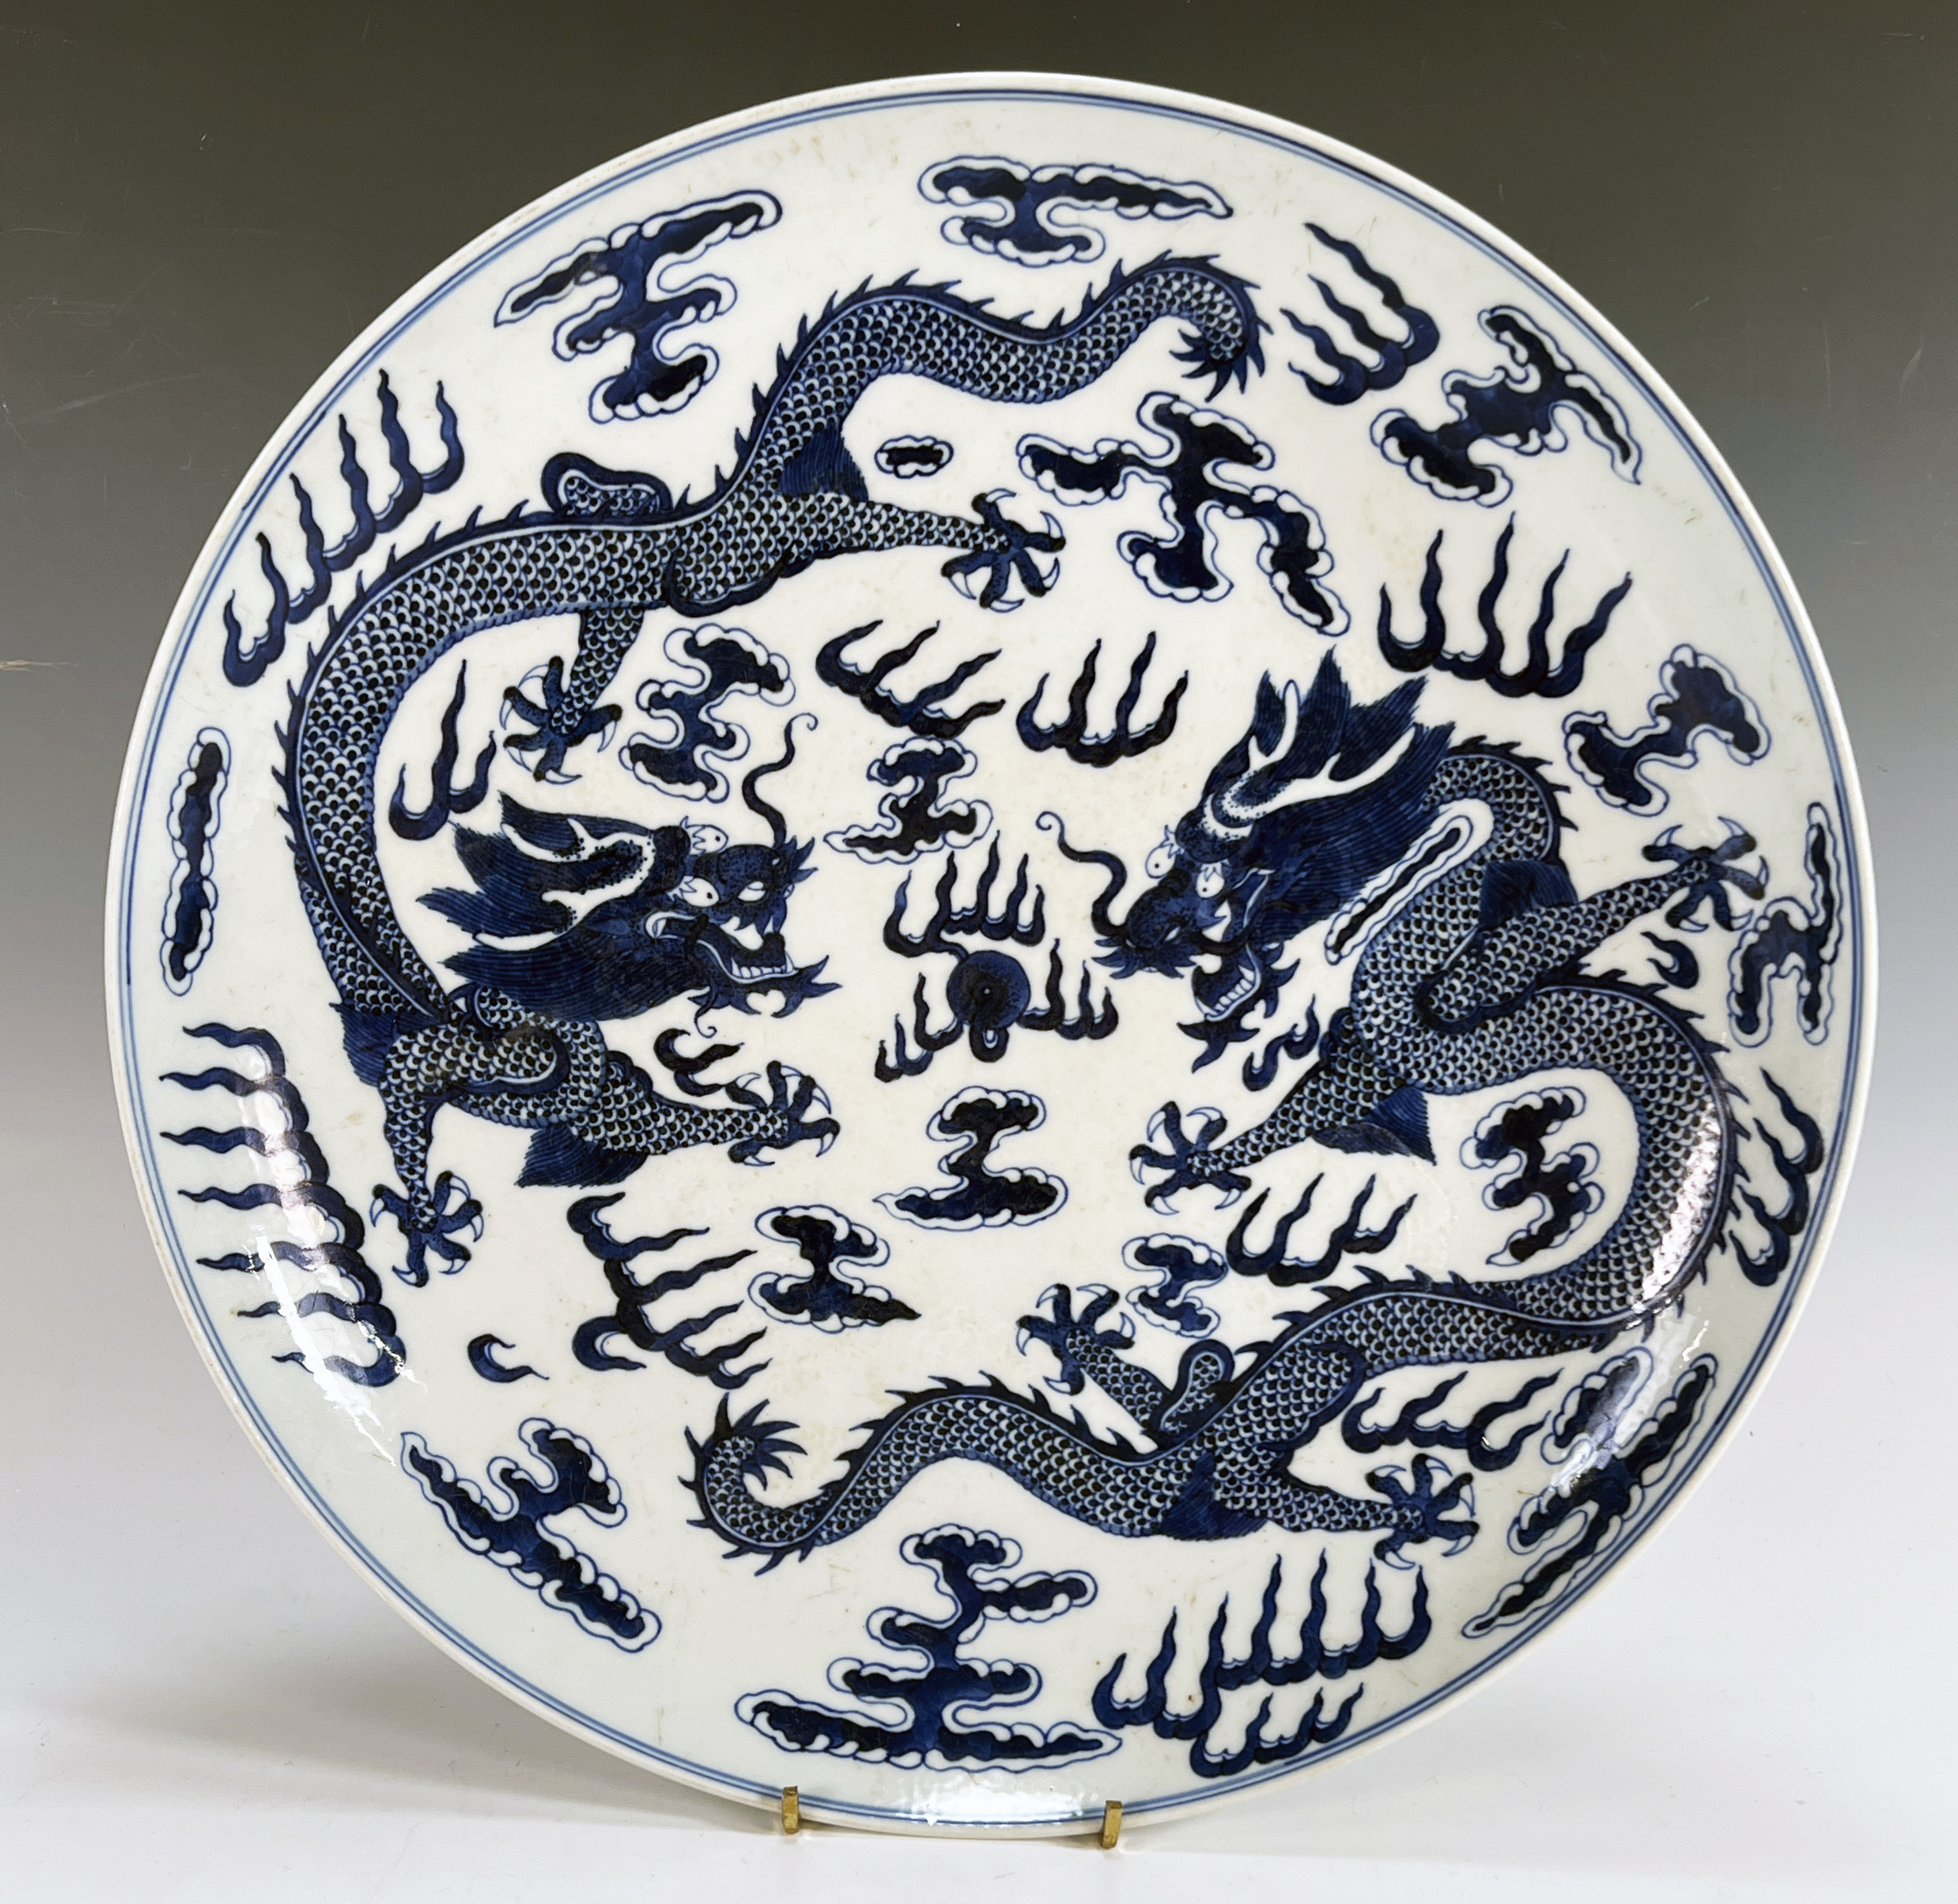 Exquisite Blue & White Chinese Charger Plate With Imperial Dragon Motif image 1